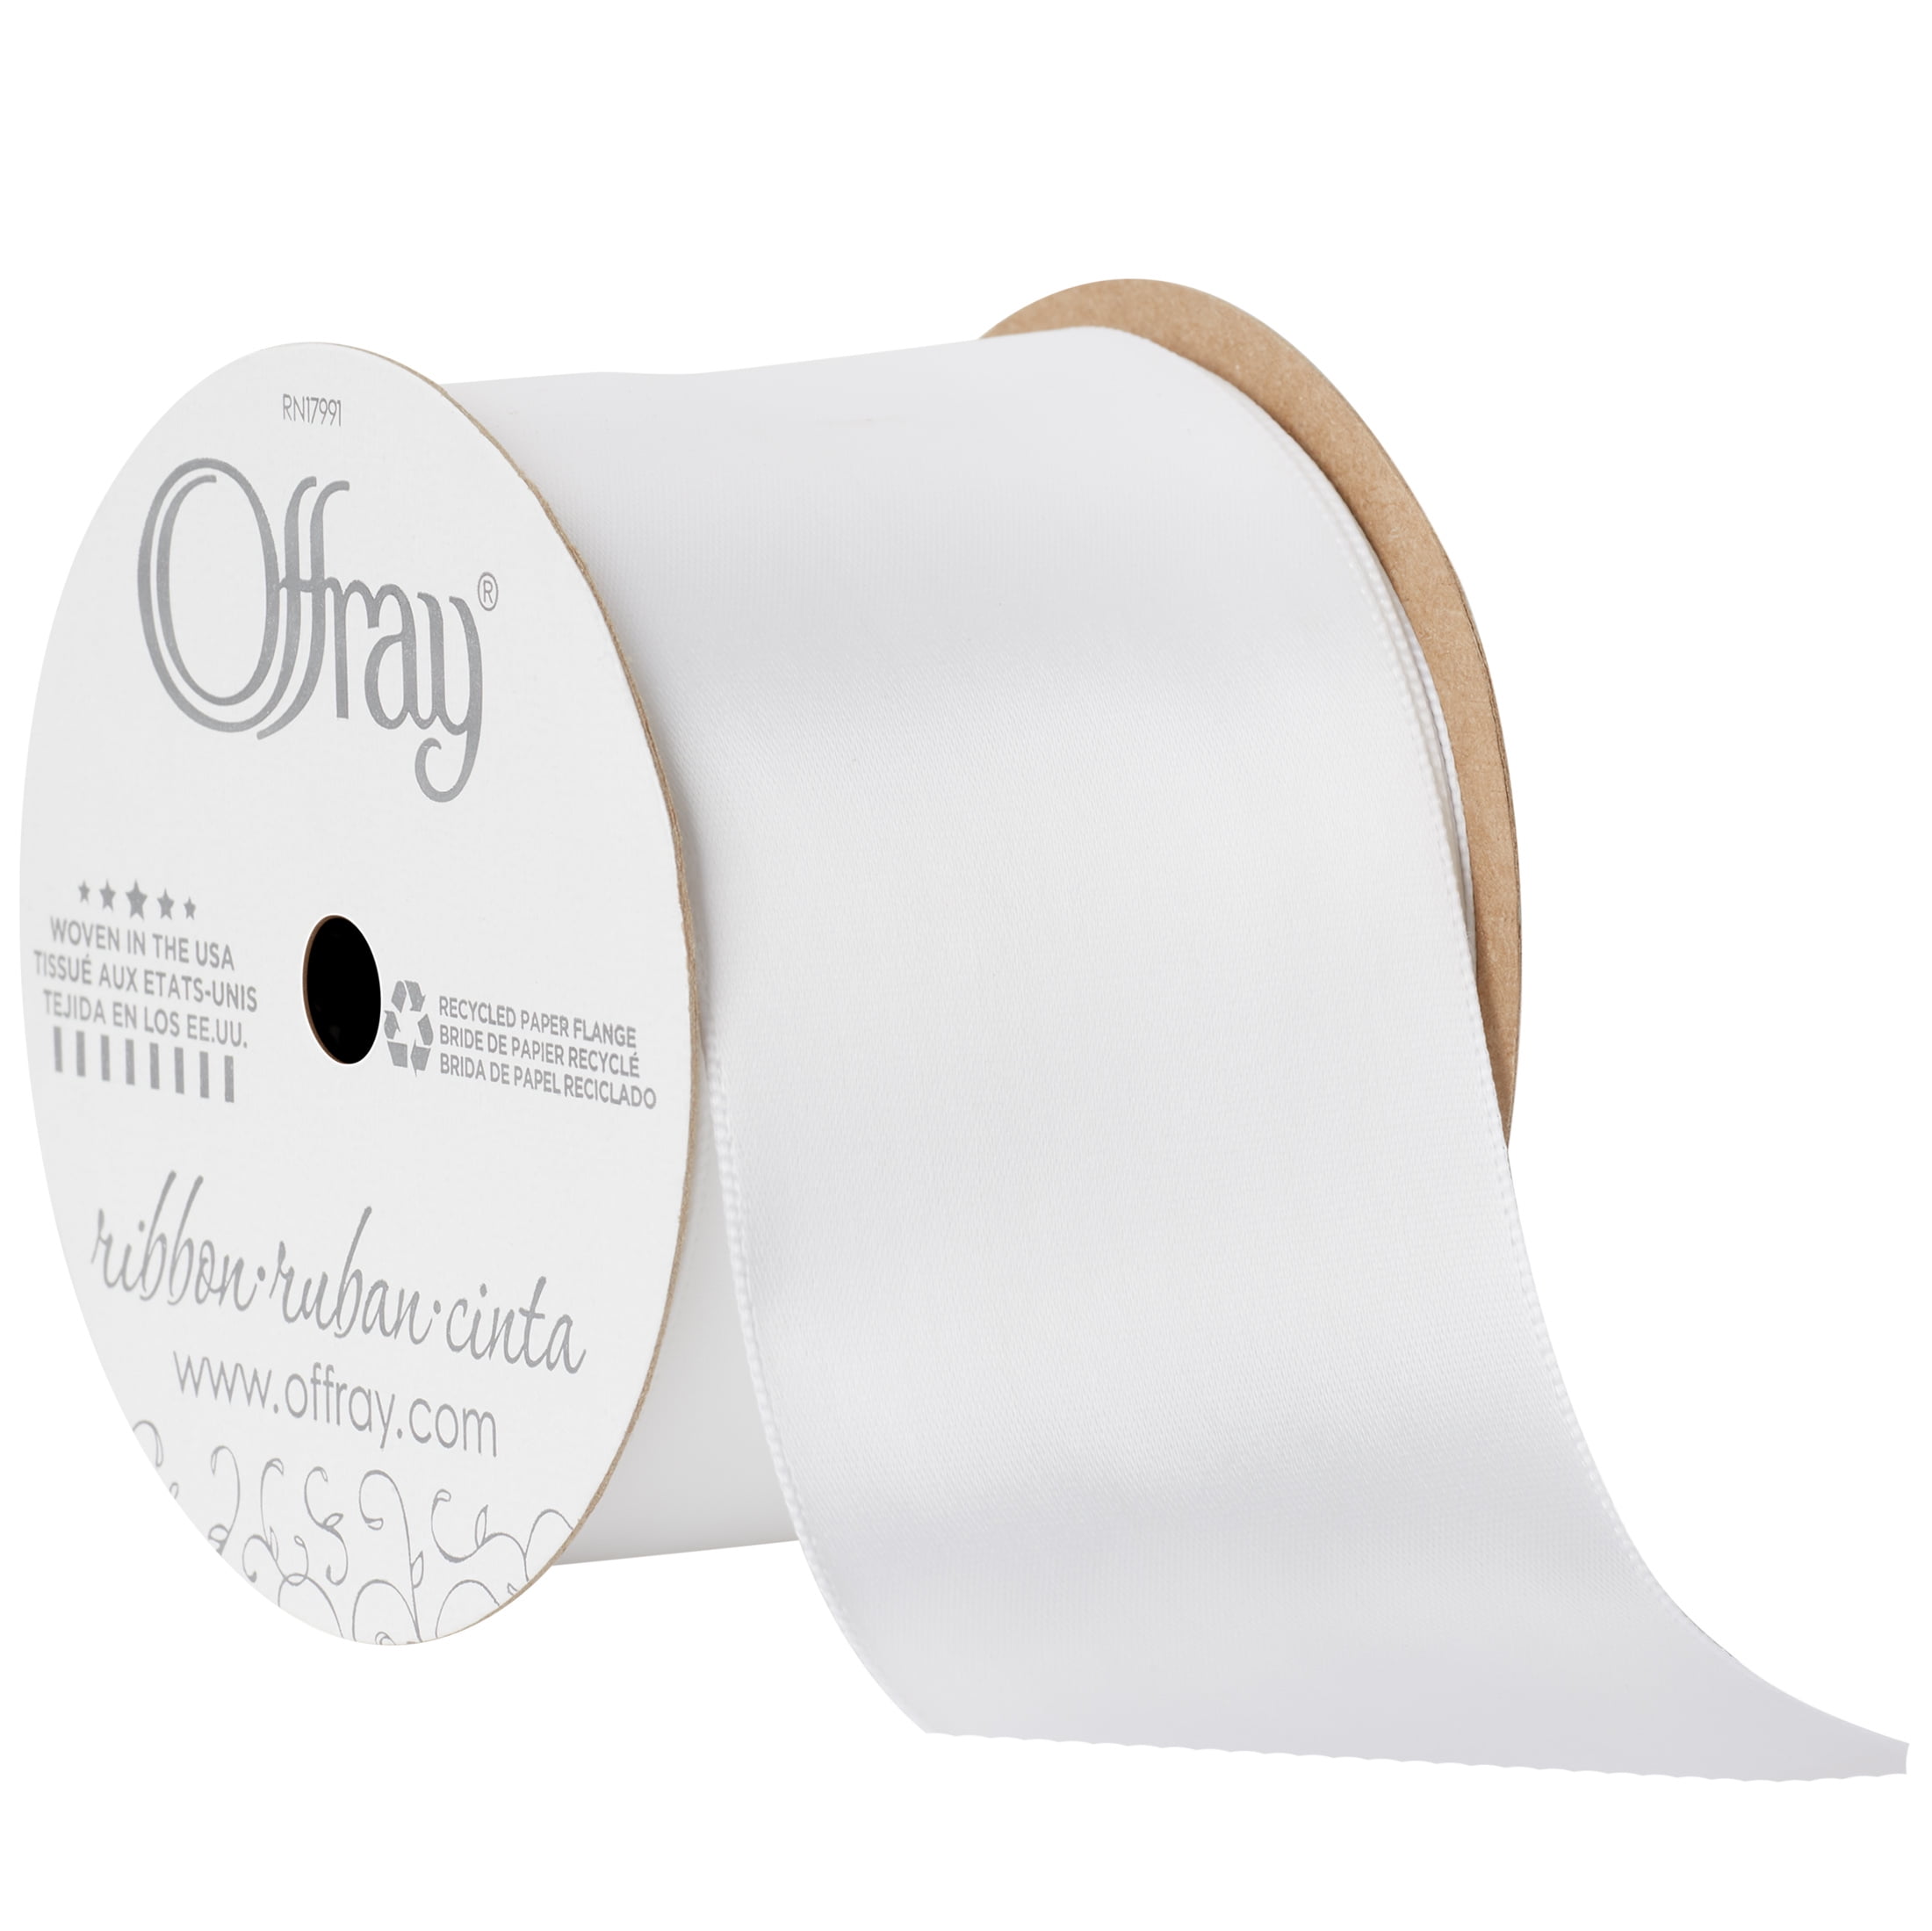 White Ribbons 1/8 width Pre-Cut to ANY LENGTH YOU NEED!